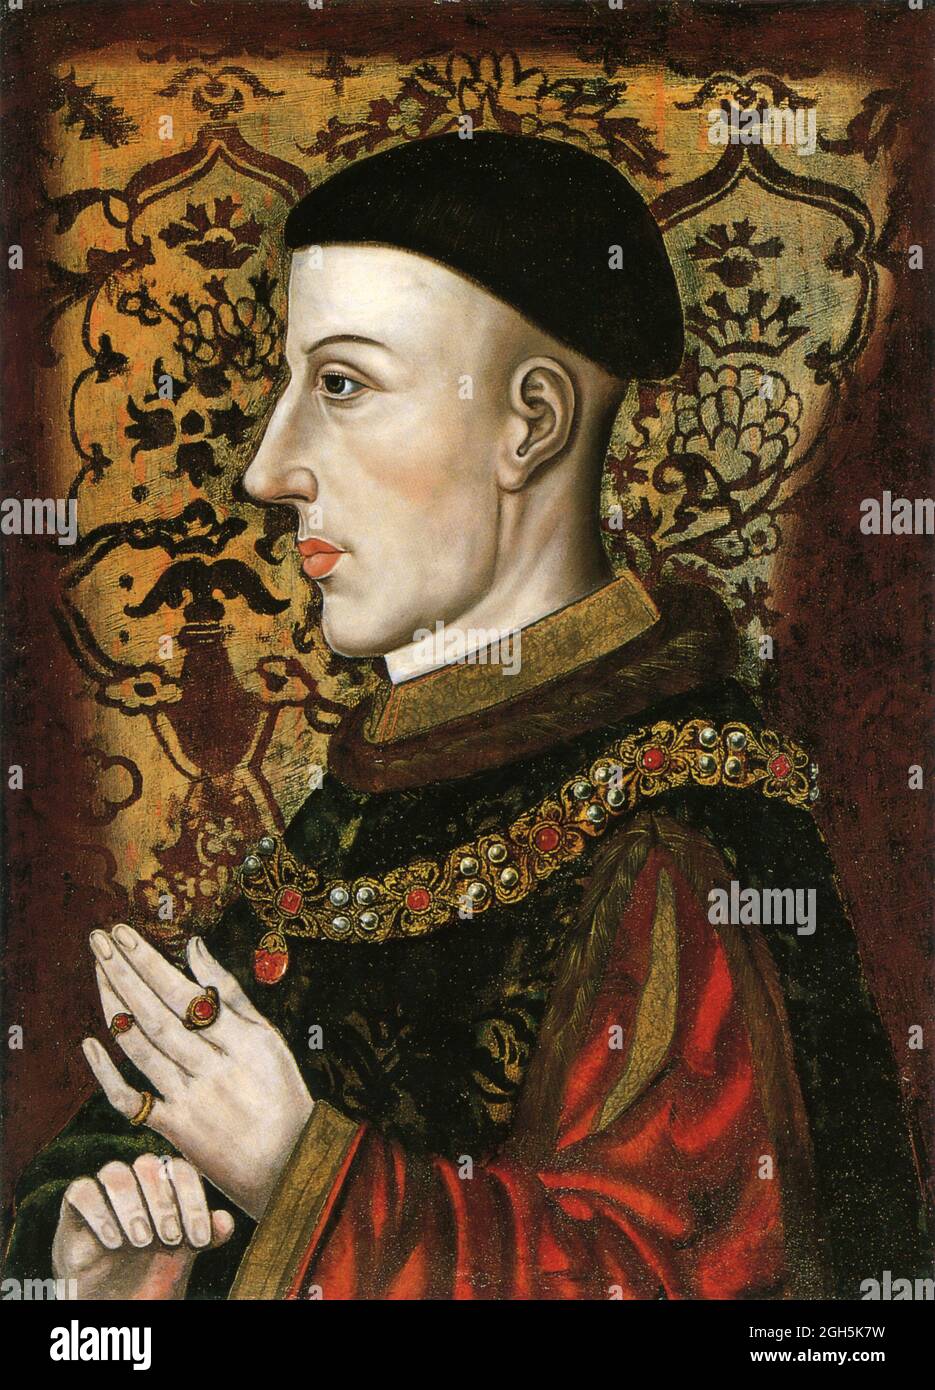 A portrait of King Henry V who was King of England from 1413 until 1422 Stock Photo